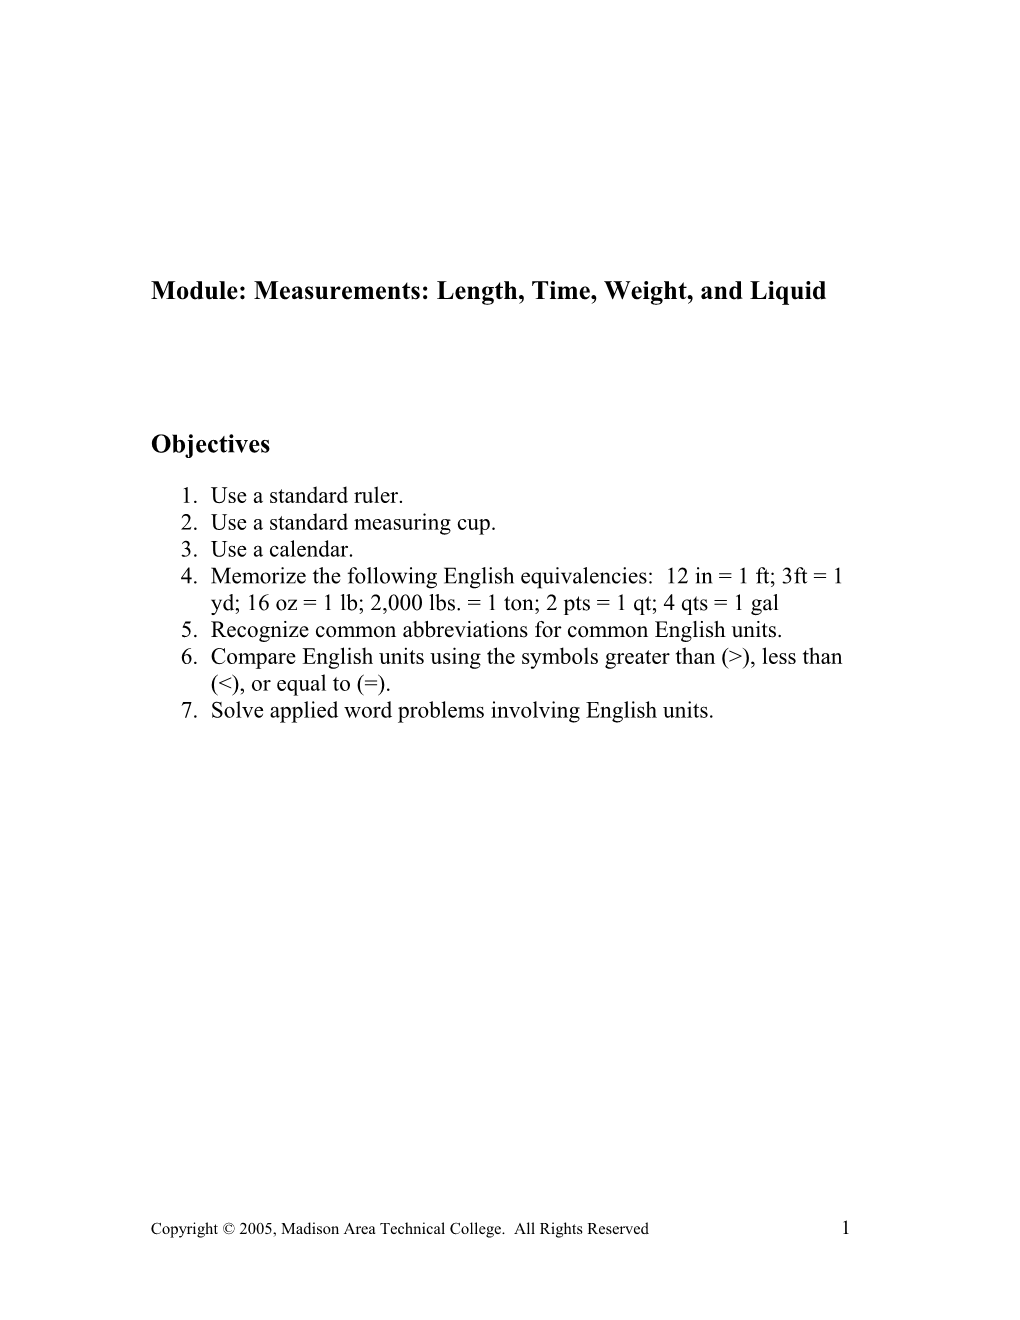 Module: Measurements: Length, Time, Weight, and Liquid